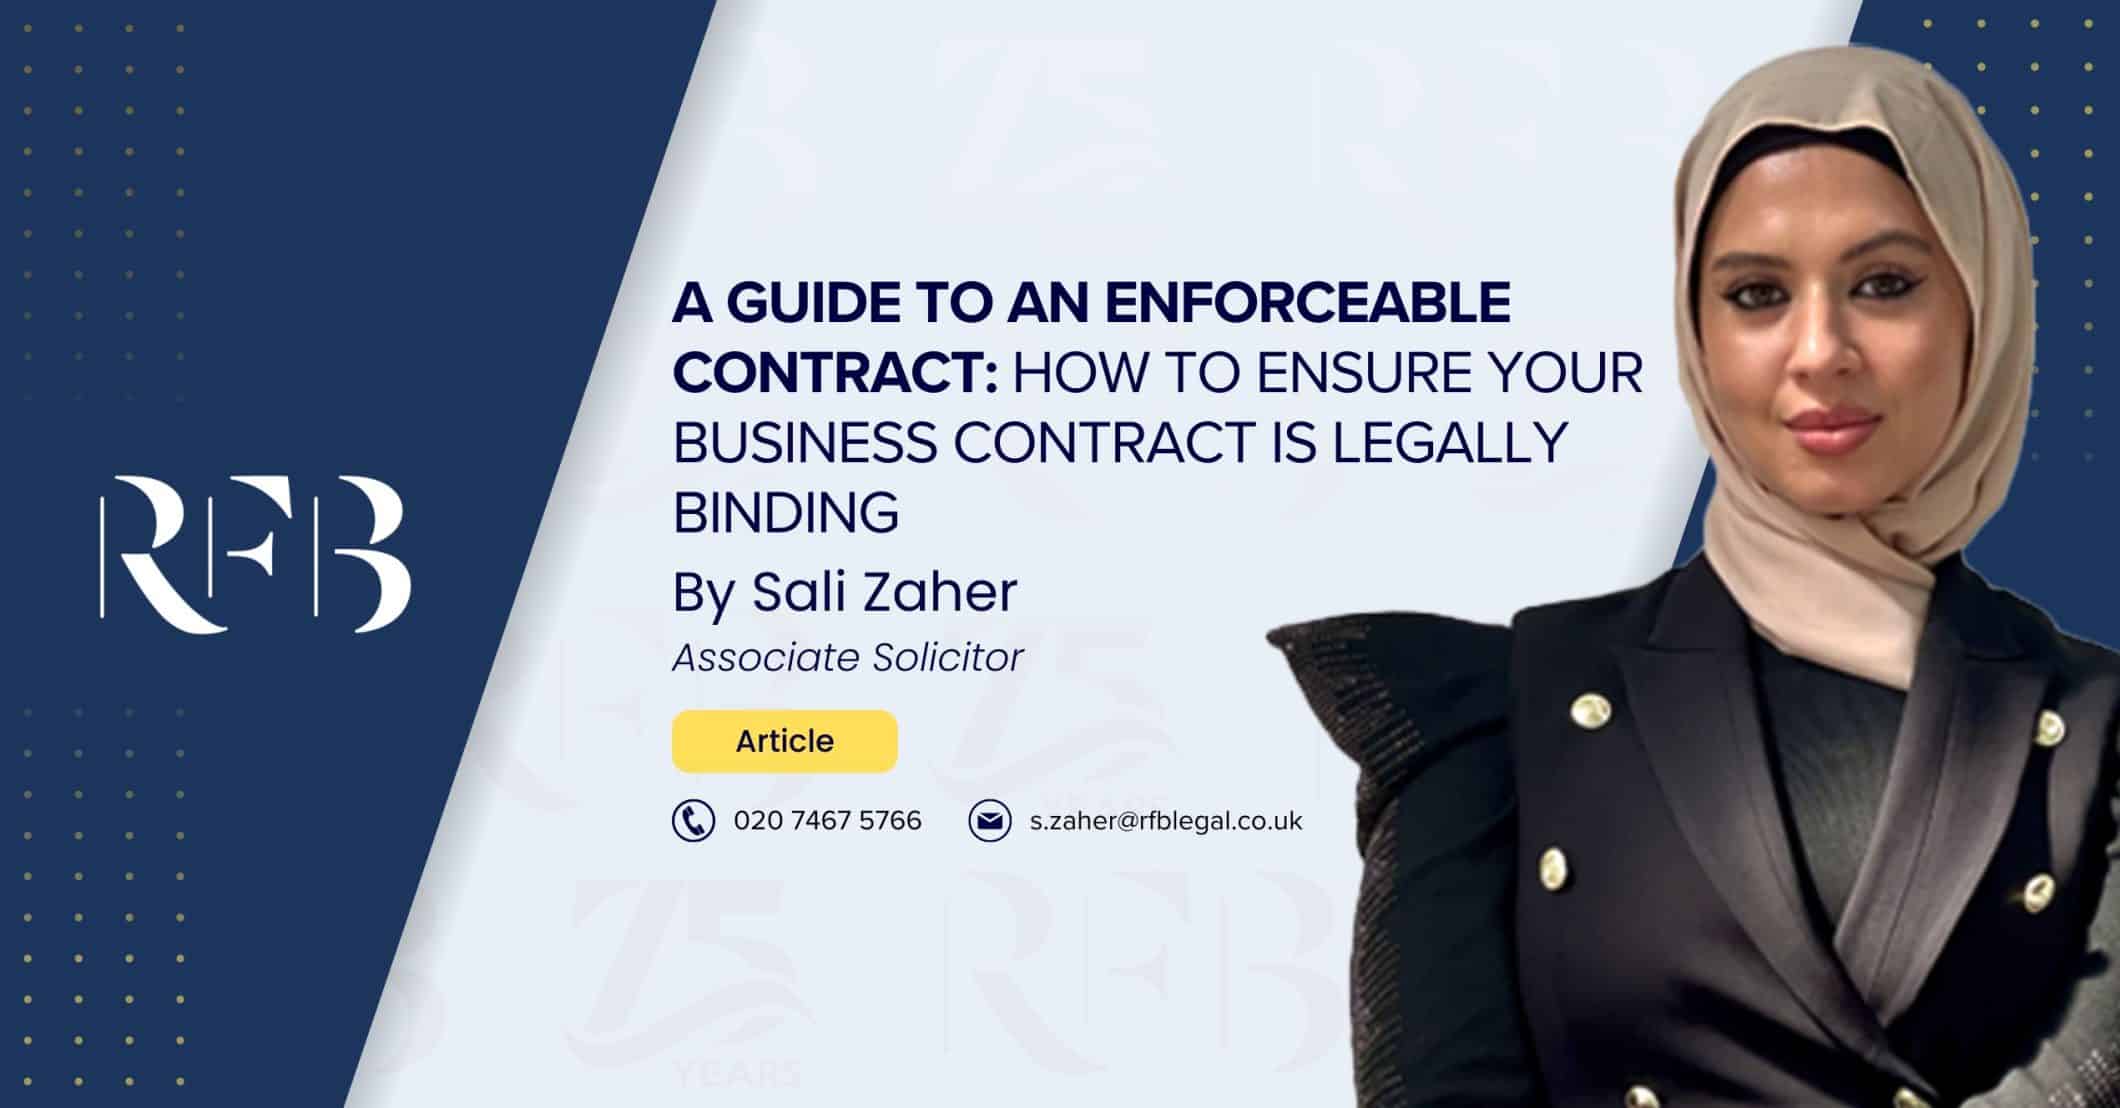 Article Banner featuring Associate Solicitor Sali Zaher for the article "A Guide to an Enforceable Contract: How to Ensure Your Business Contract is Legally Binding"